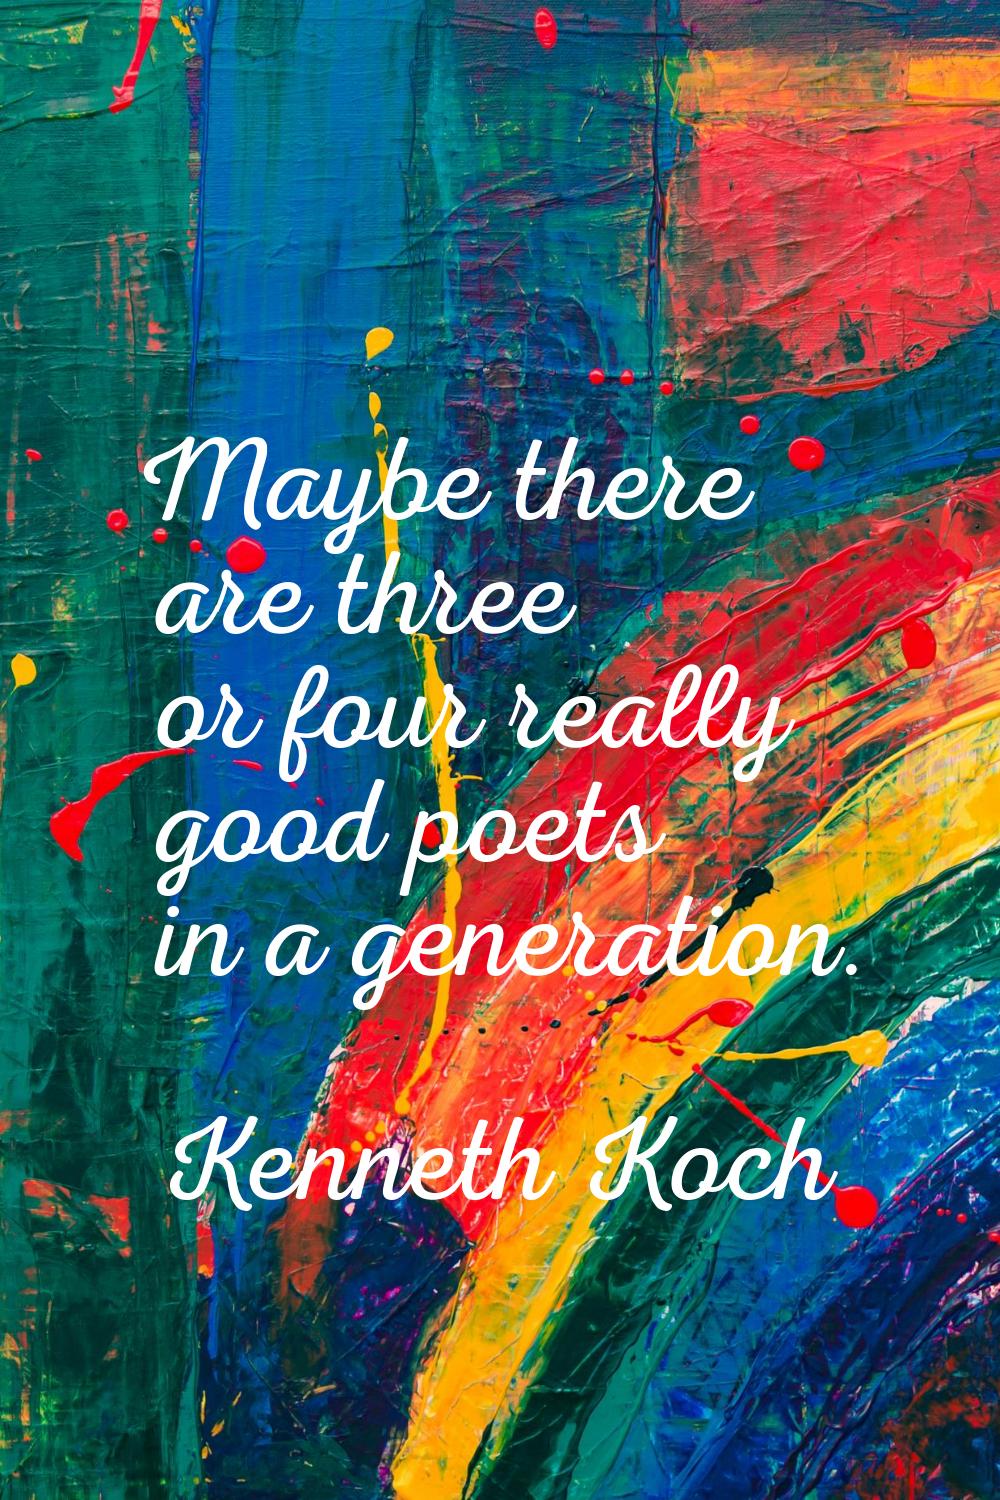 Maybe there are three or four really good poets in a generation.